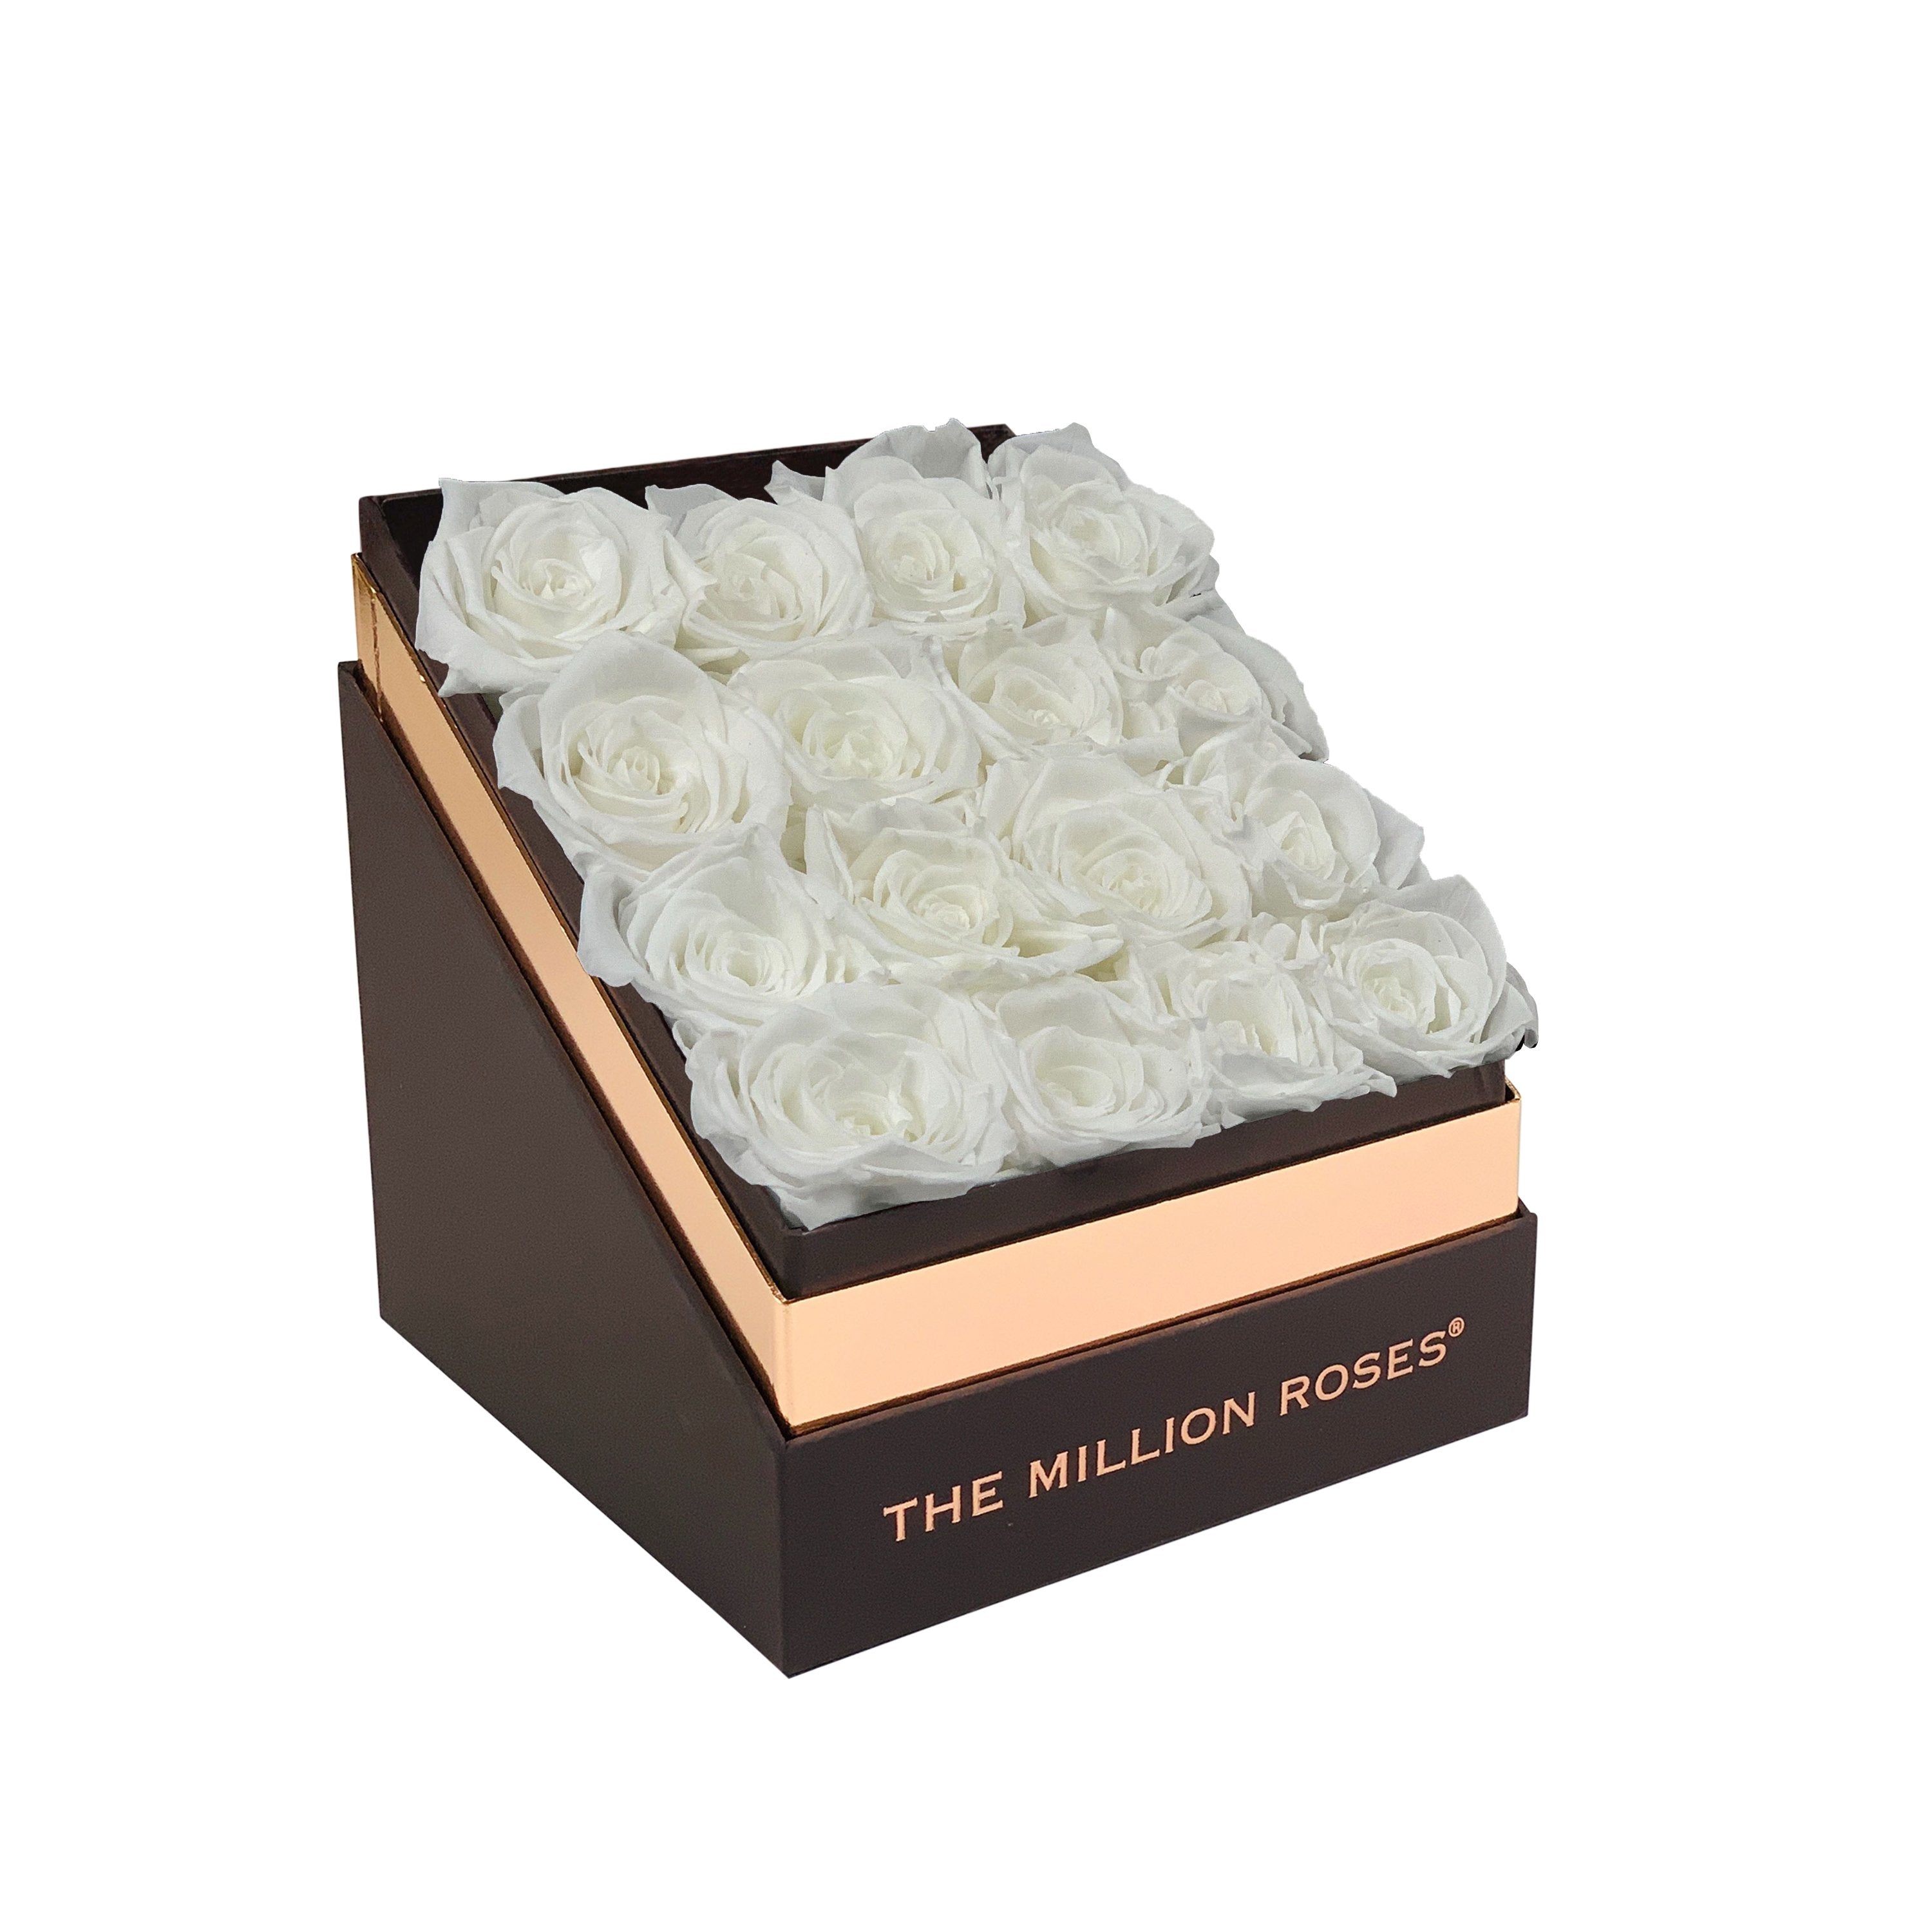 The Square - Coffee Box - White Roses